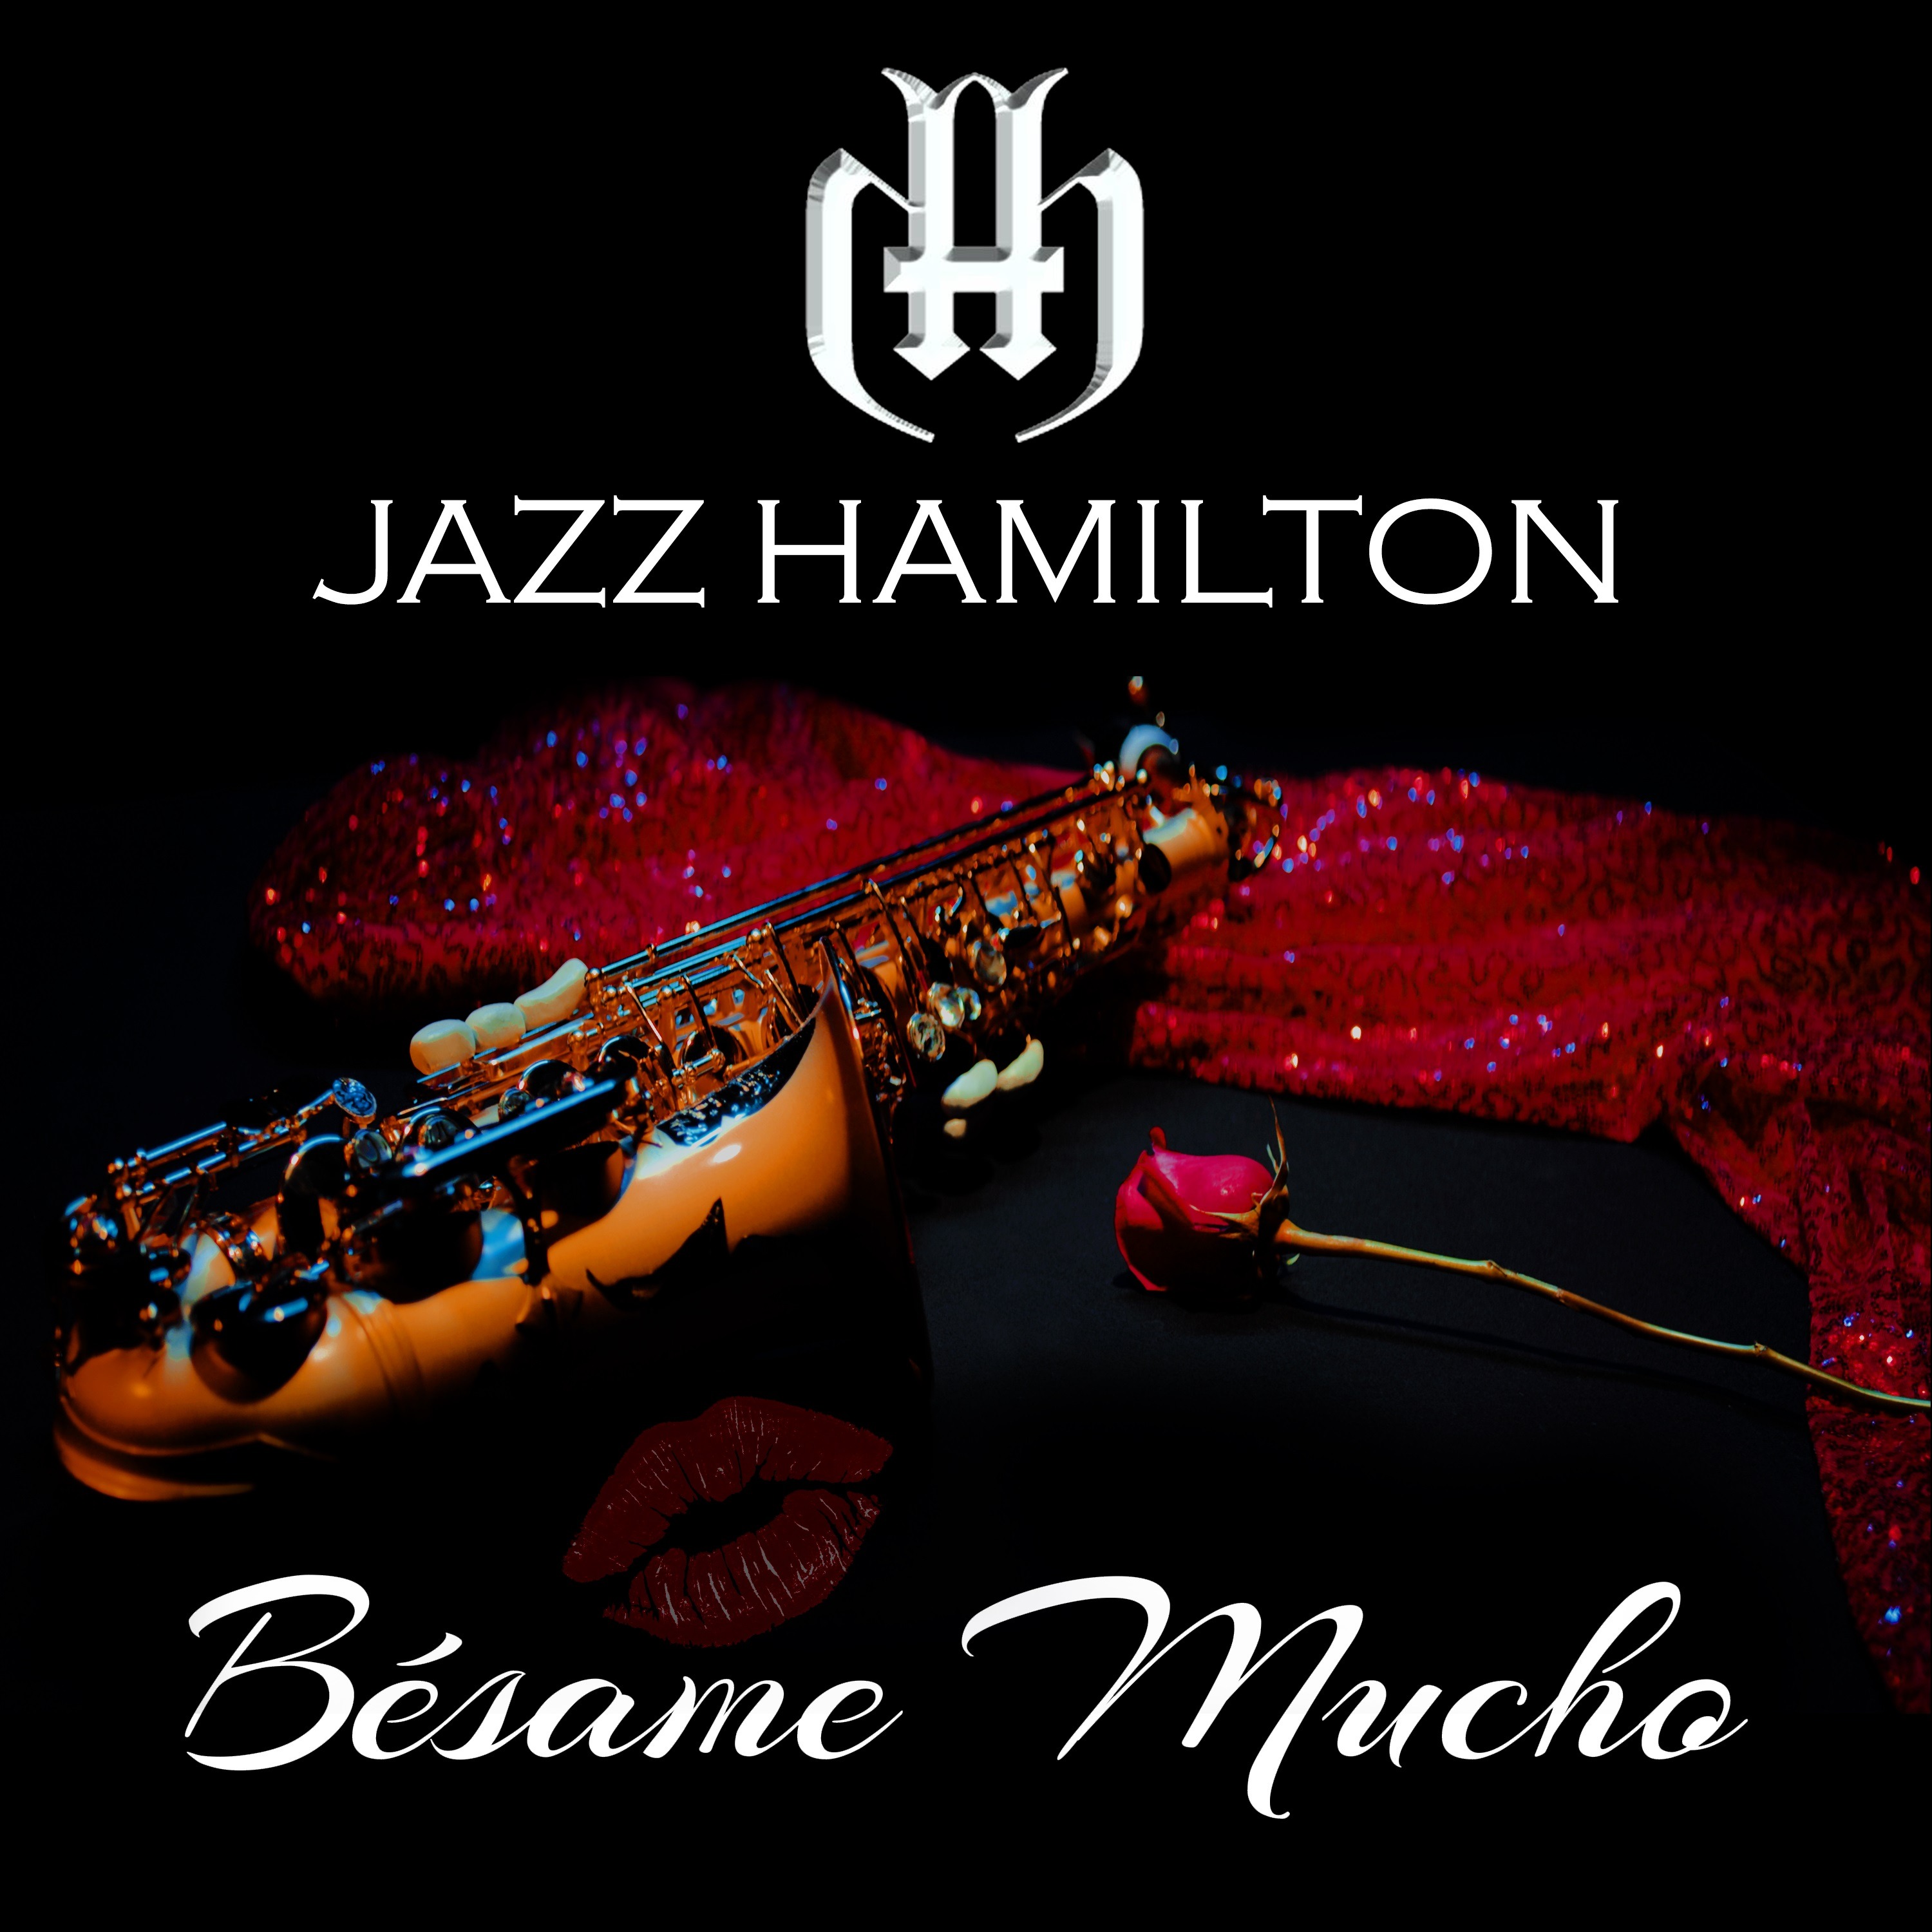 The New Epitome of Latin Jazz - ‘Besame Mucho’ is All Set to Take the World By Storm